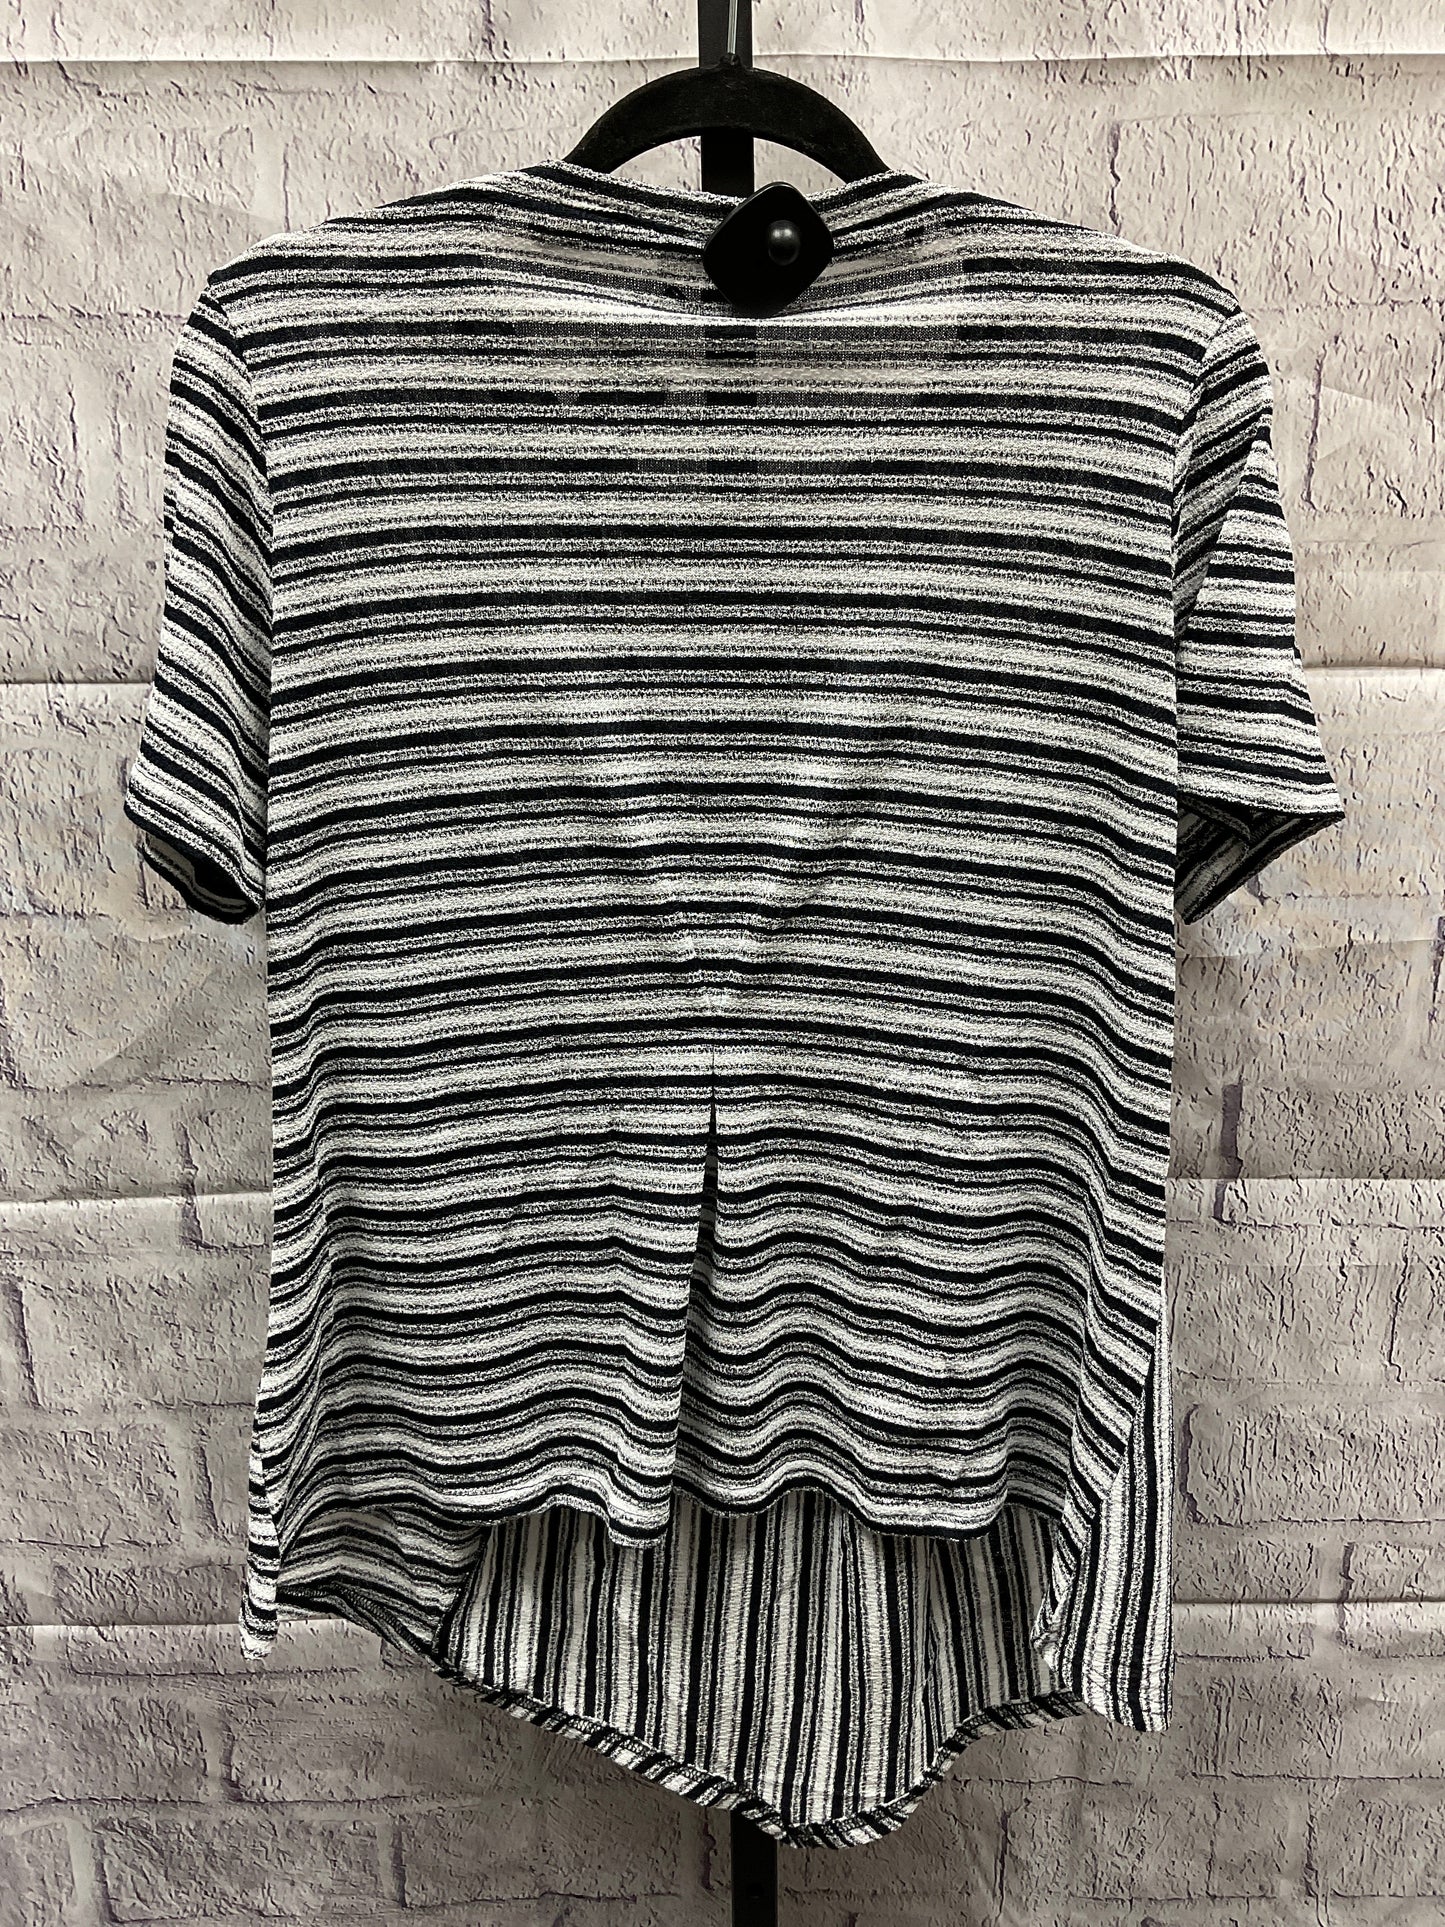 Top Short Sleeve By Diane Gilman  Size: M